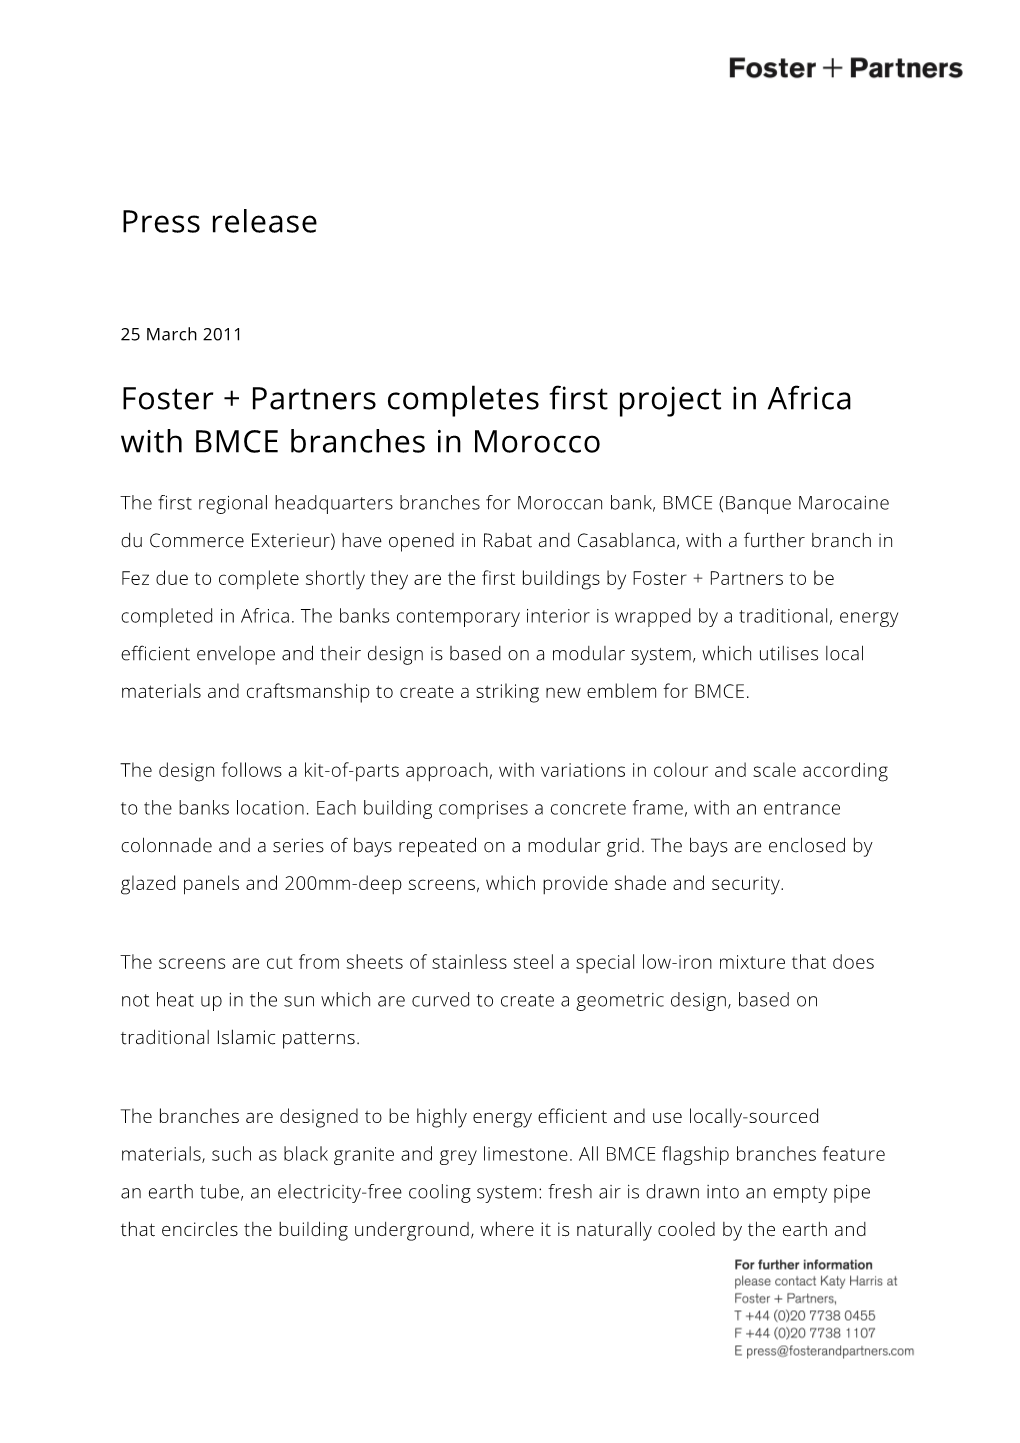 Press Release Foster + Partners Completes First Project in Africa with BMCE Branches in Morocco